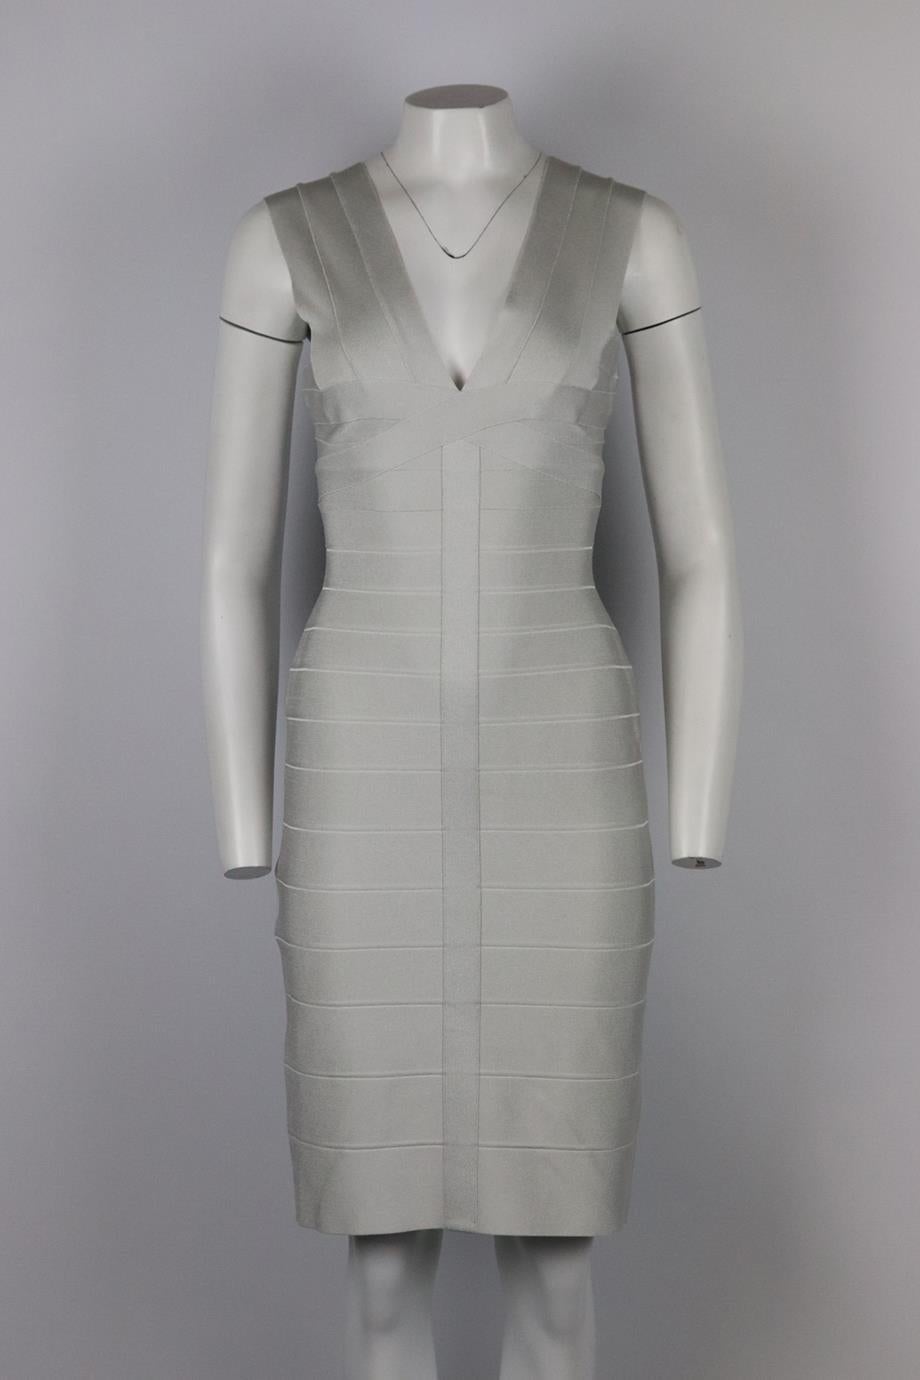 Herve Leger bandage mini dress. Light-grey. Sleeveless, v-neck. Zip fastening at back. 90% Rayon, 9% nylon, 1% elastane. Size: Large (UK 12, US 8, FR 40, IT 44). Bust: 31 in. Waist: 26 in. Hips: 36 in. Length: 39 in. Very good condition - Few very